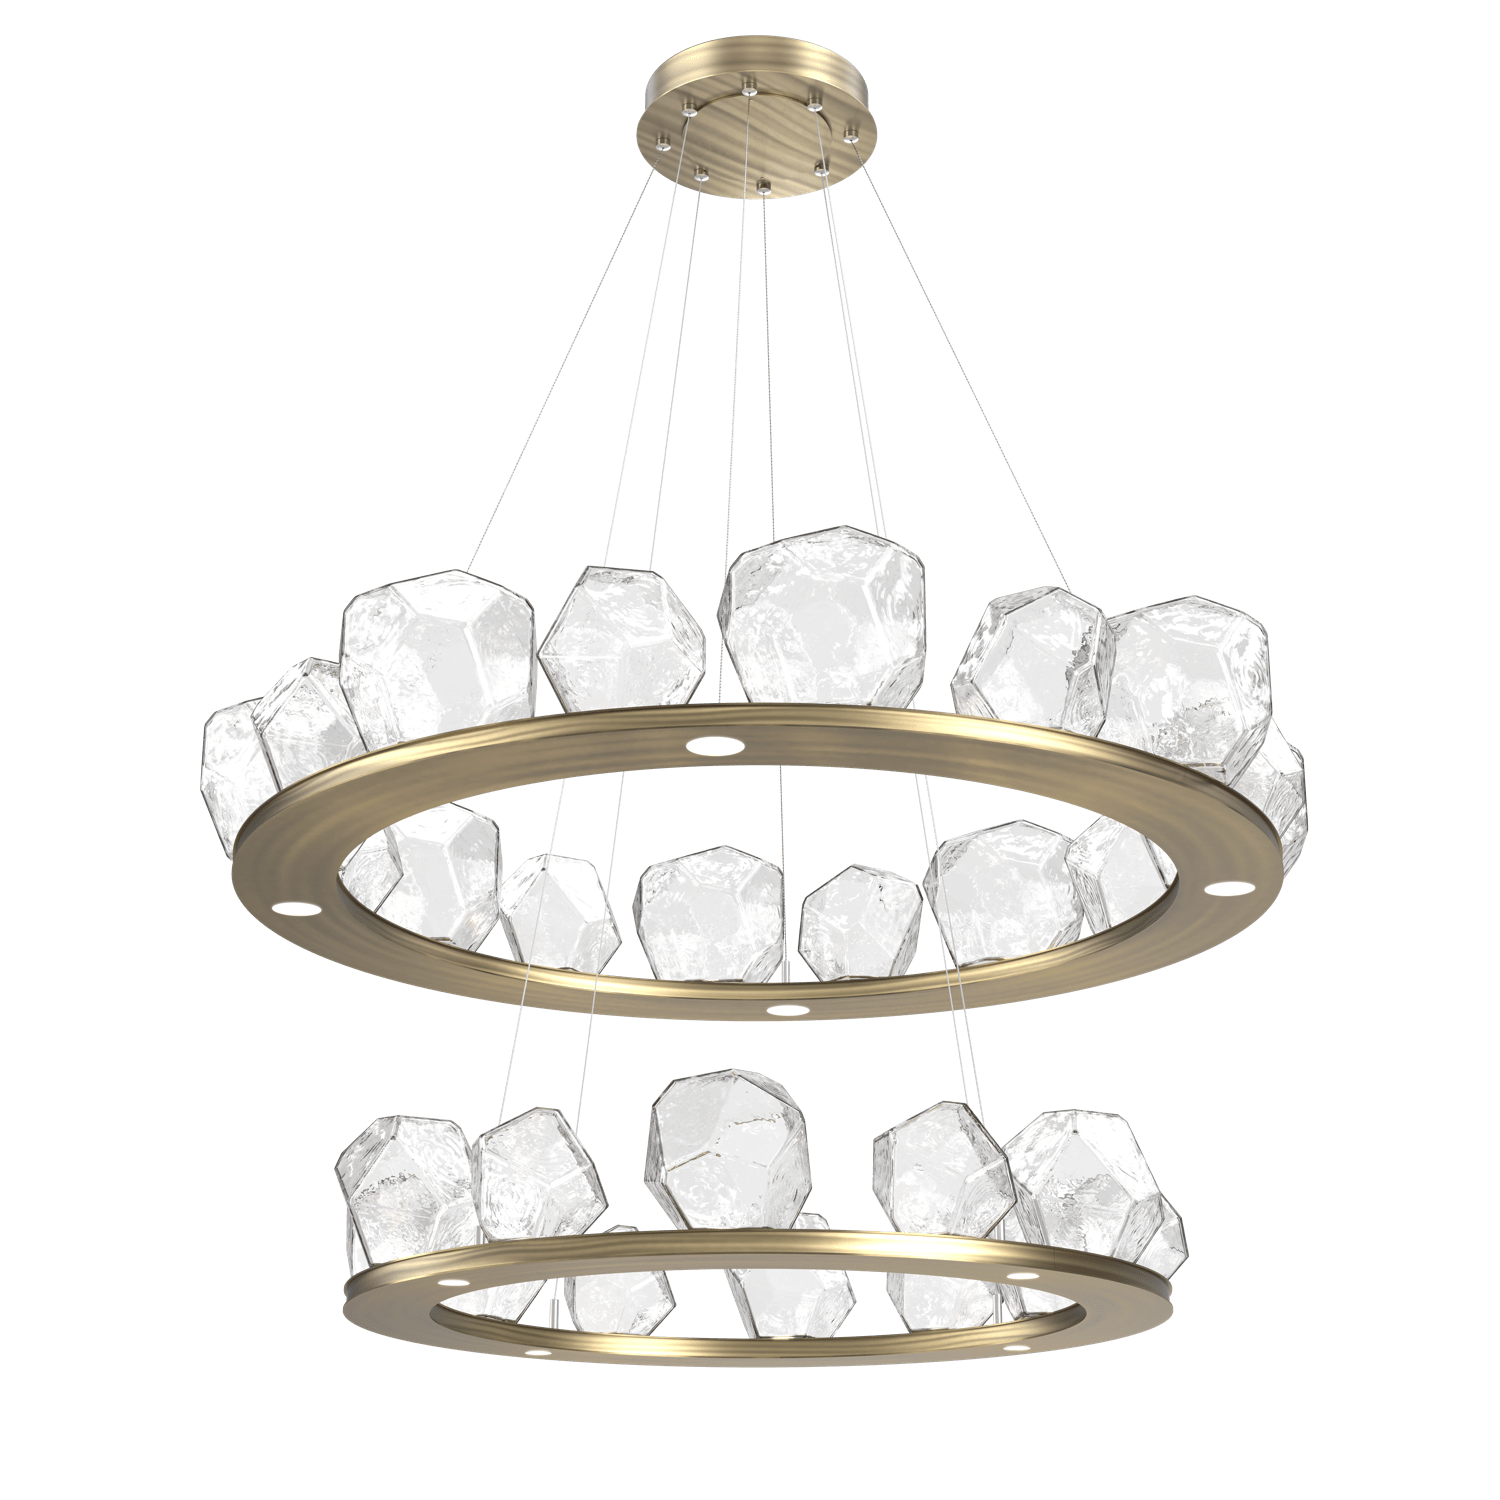 CHB0039-2B-HB-C-Hammerton-Studio-Gem-48-inch-two-tier-ring-chandelier-with-heritage-brass-finish-and-clear-blown-glass-shades-and-LED-lamping